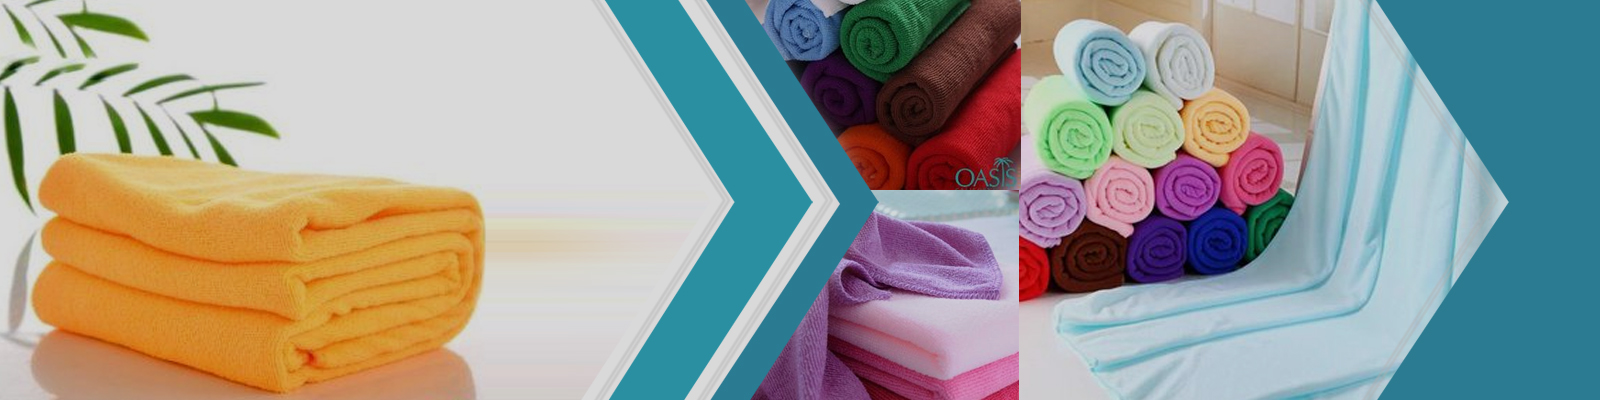 Top Manufacturers and Suppliers of Microfiber in the USA